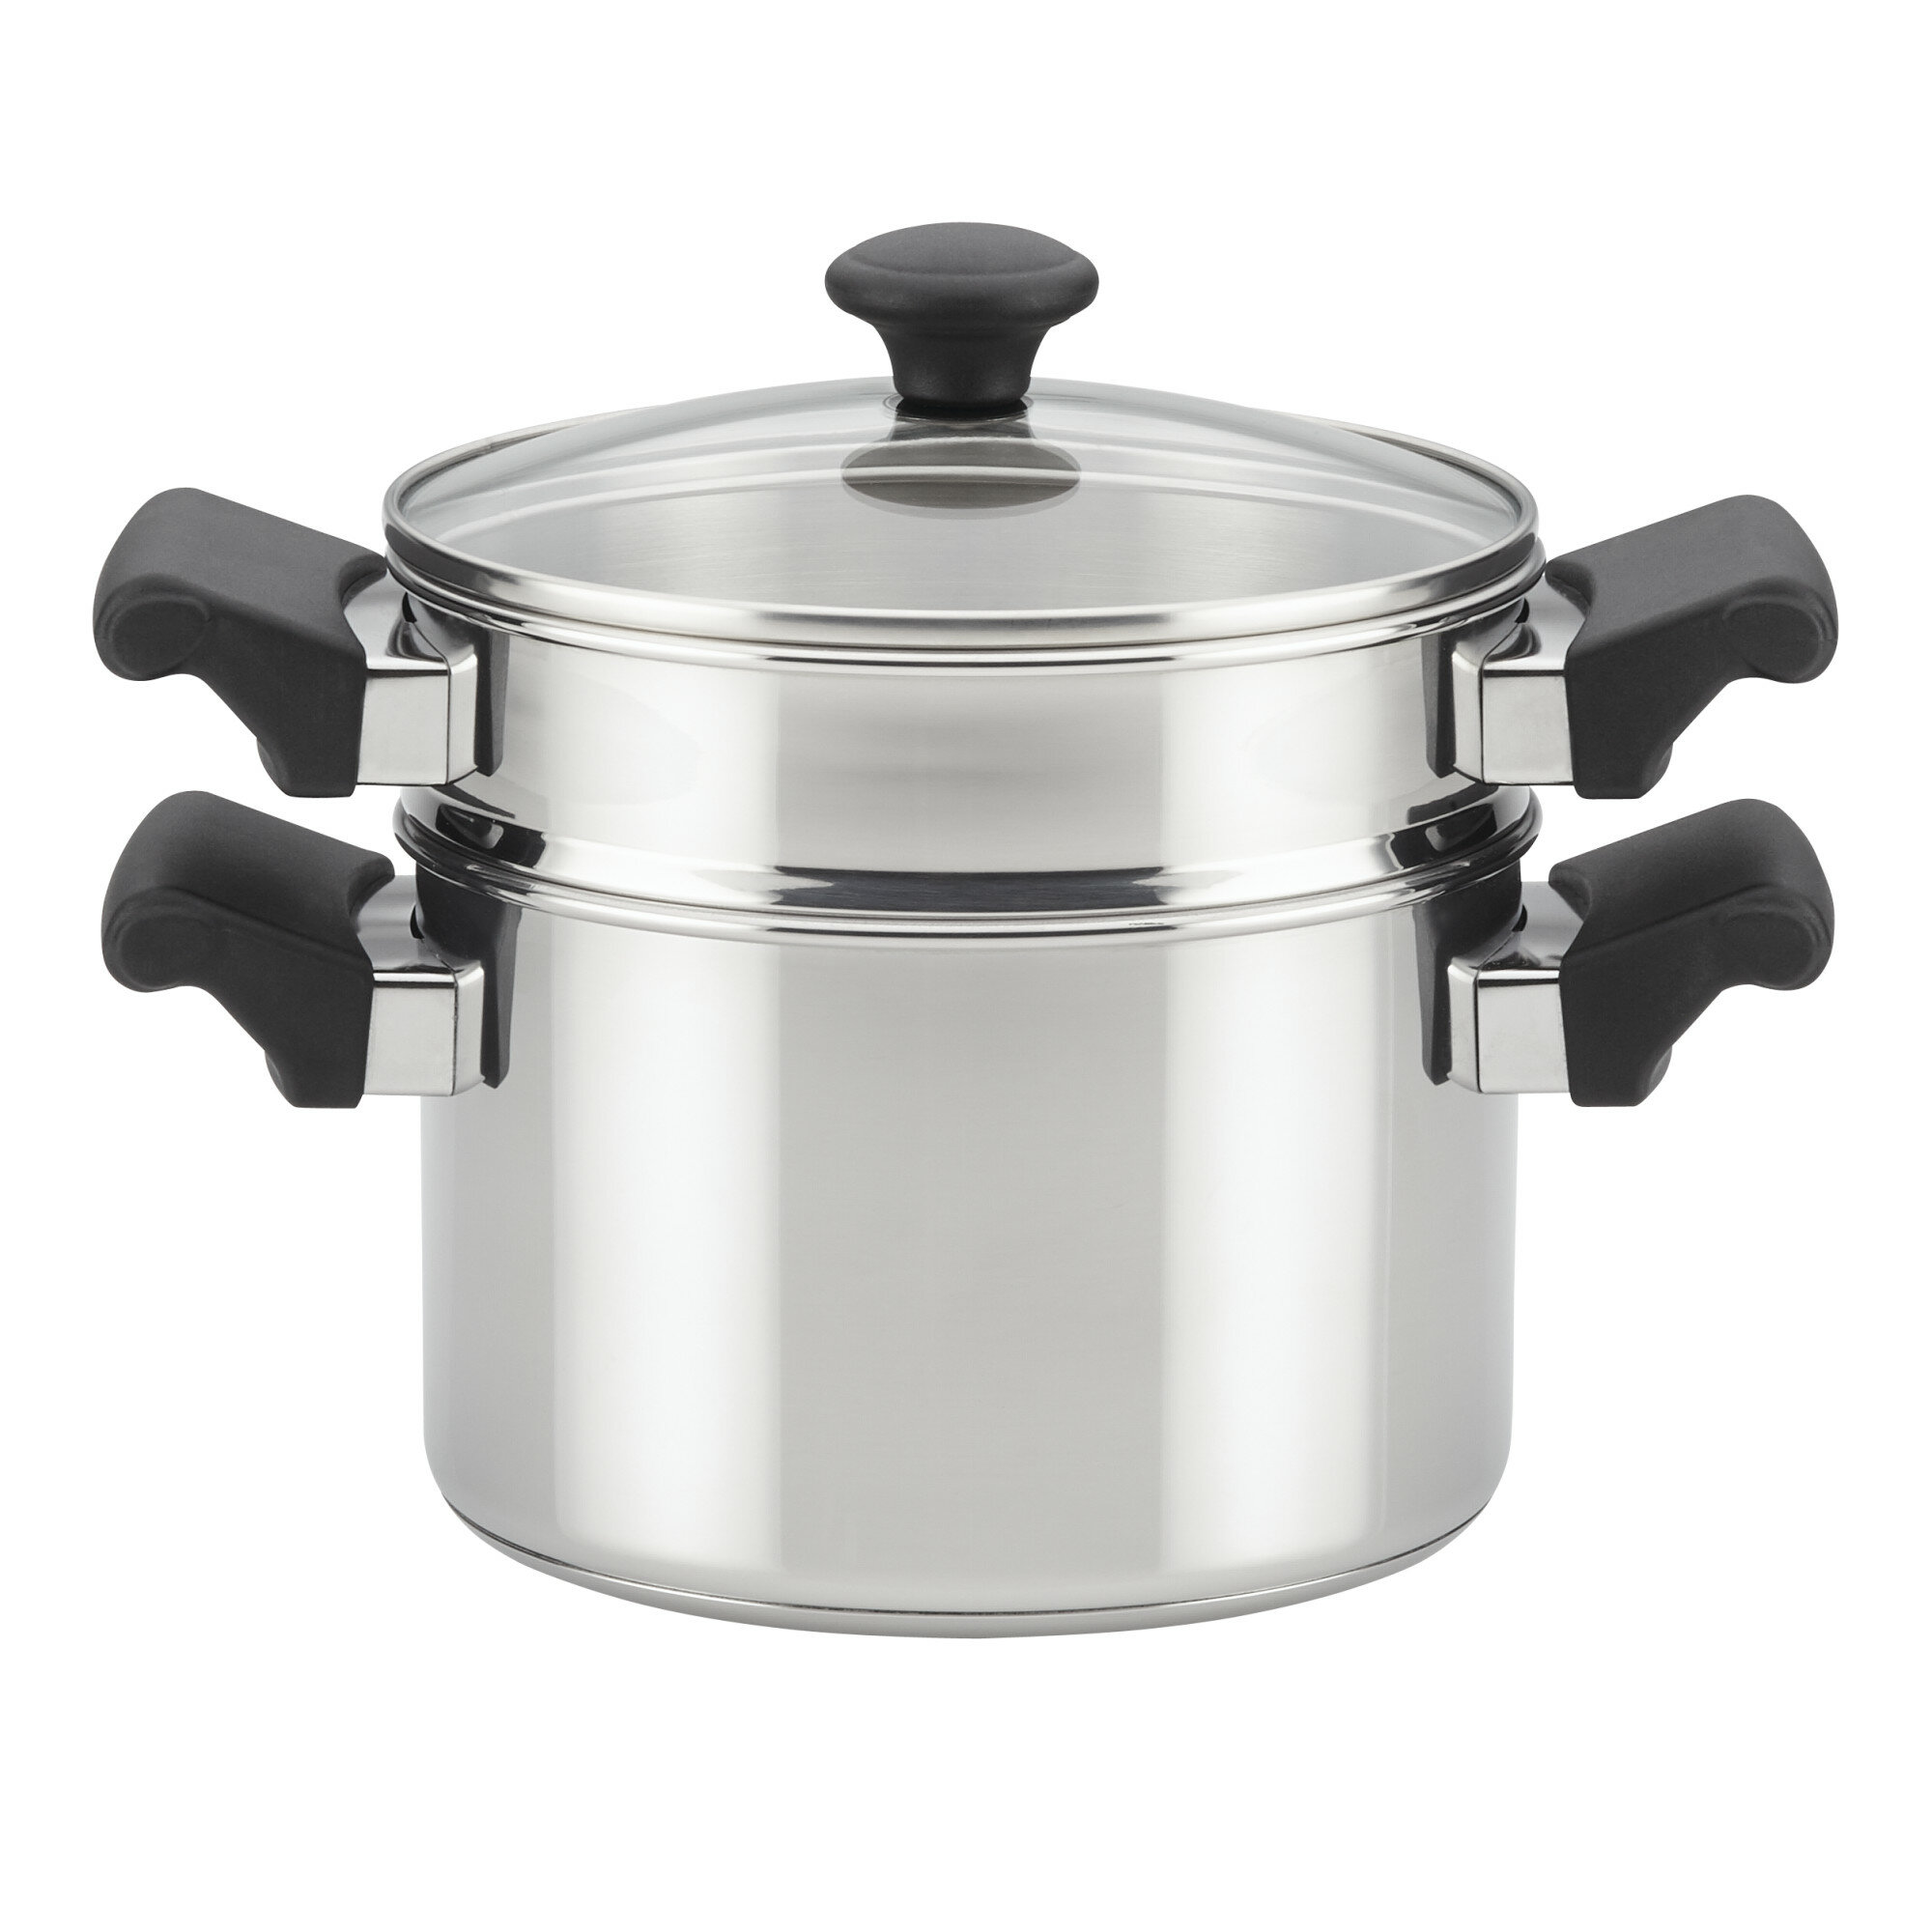 Farberware Classic Stainless Steel Stockpot with Lid, 11-Quart